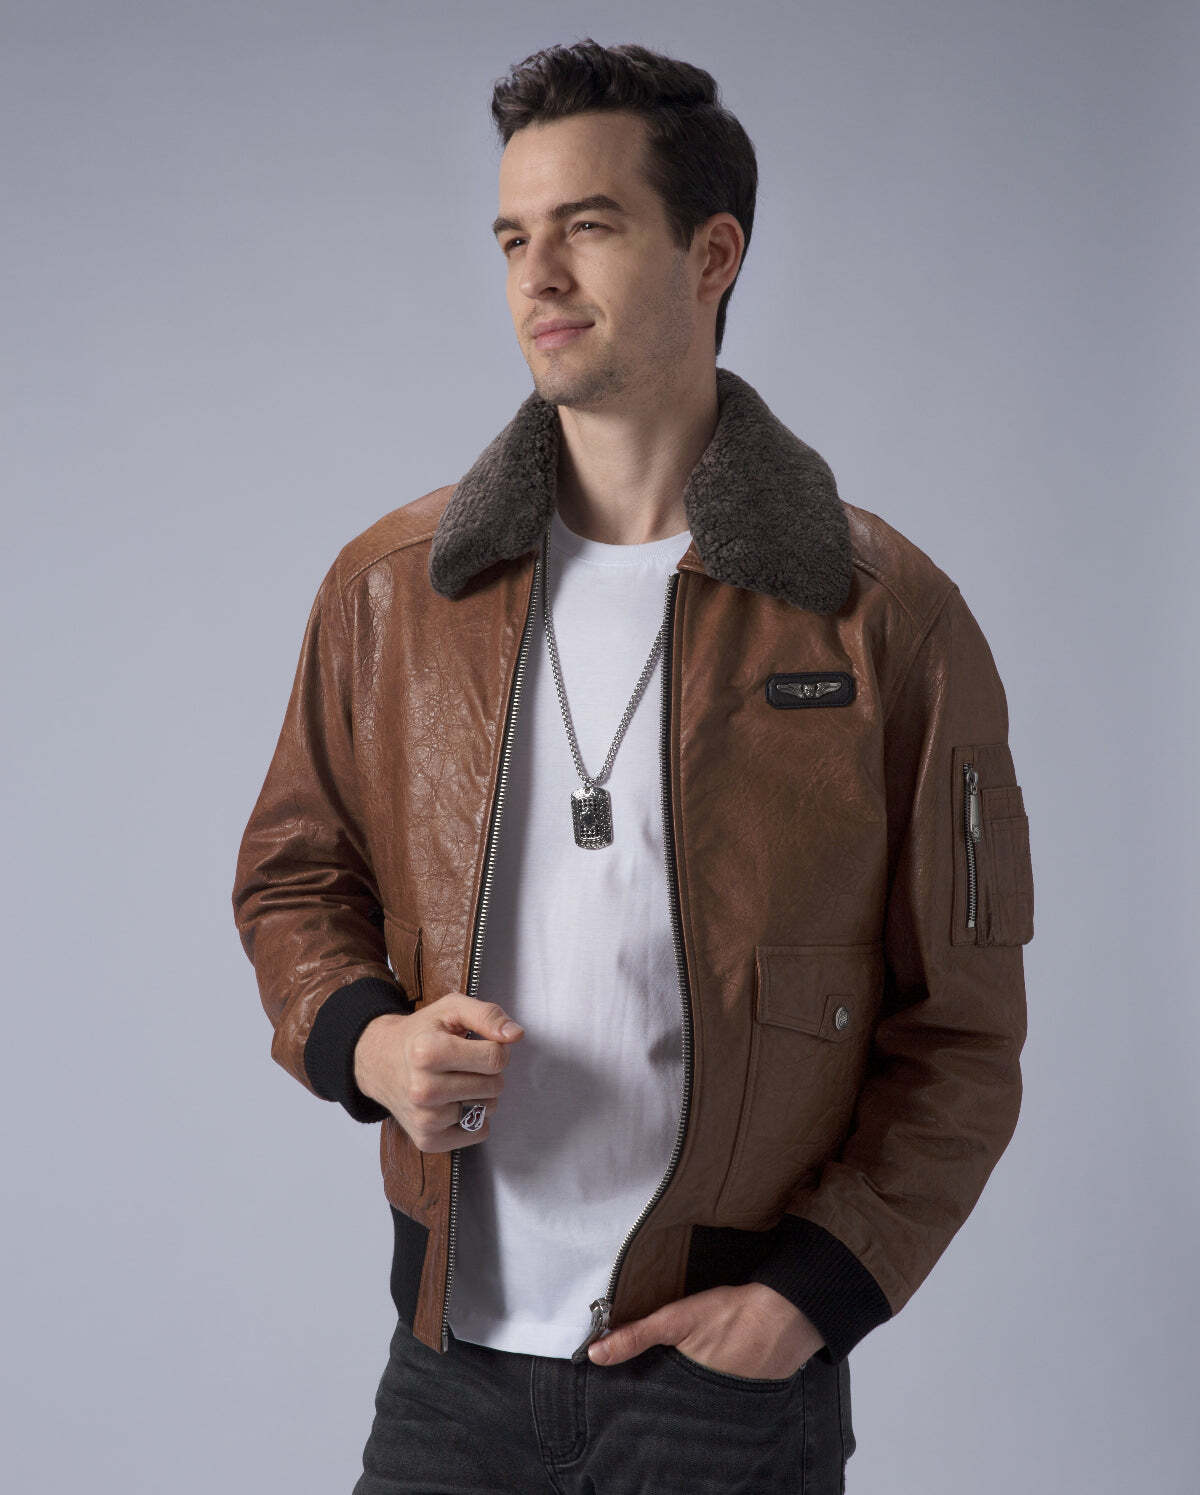 Brown G-1 Navy Leather Flight Jacket with Removable Fur Collar